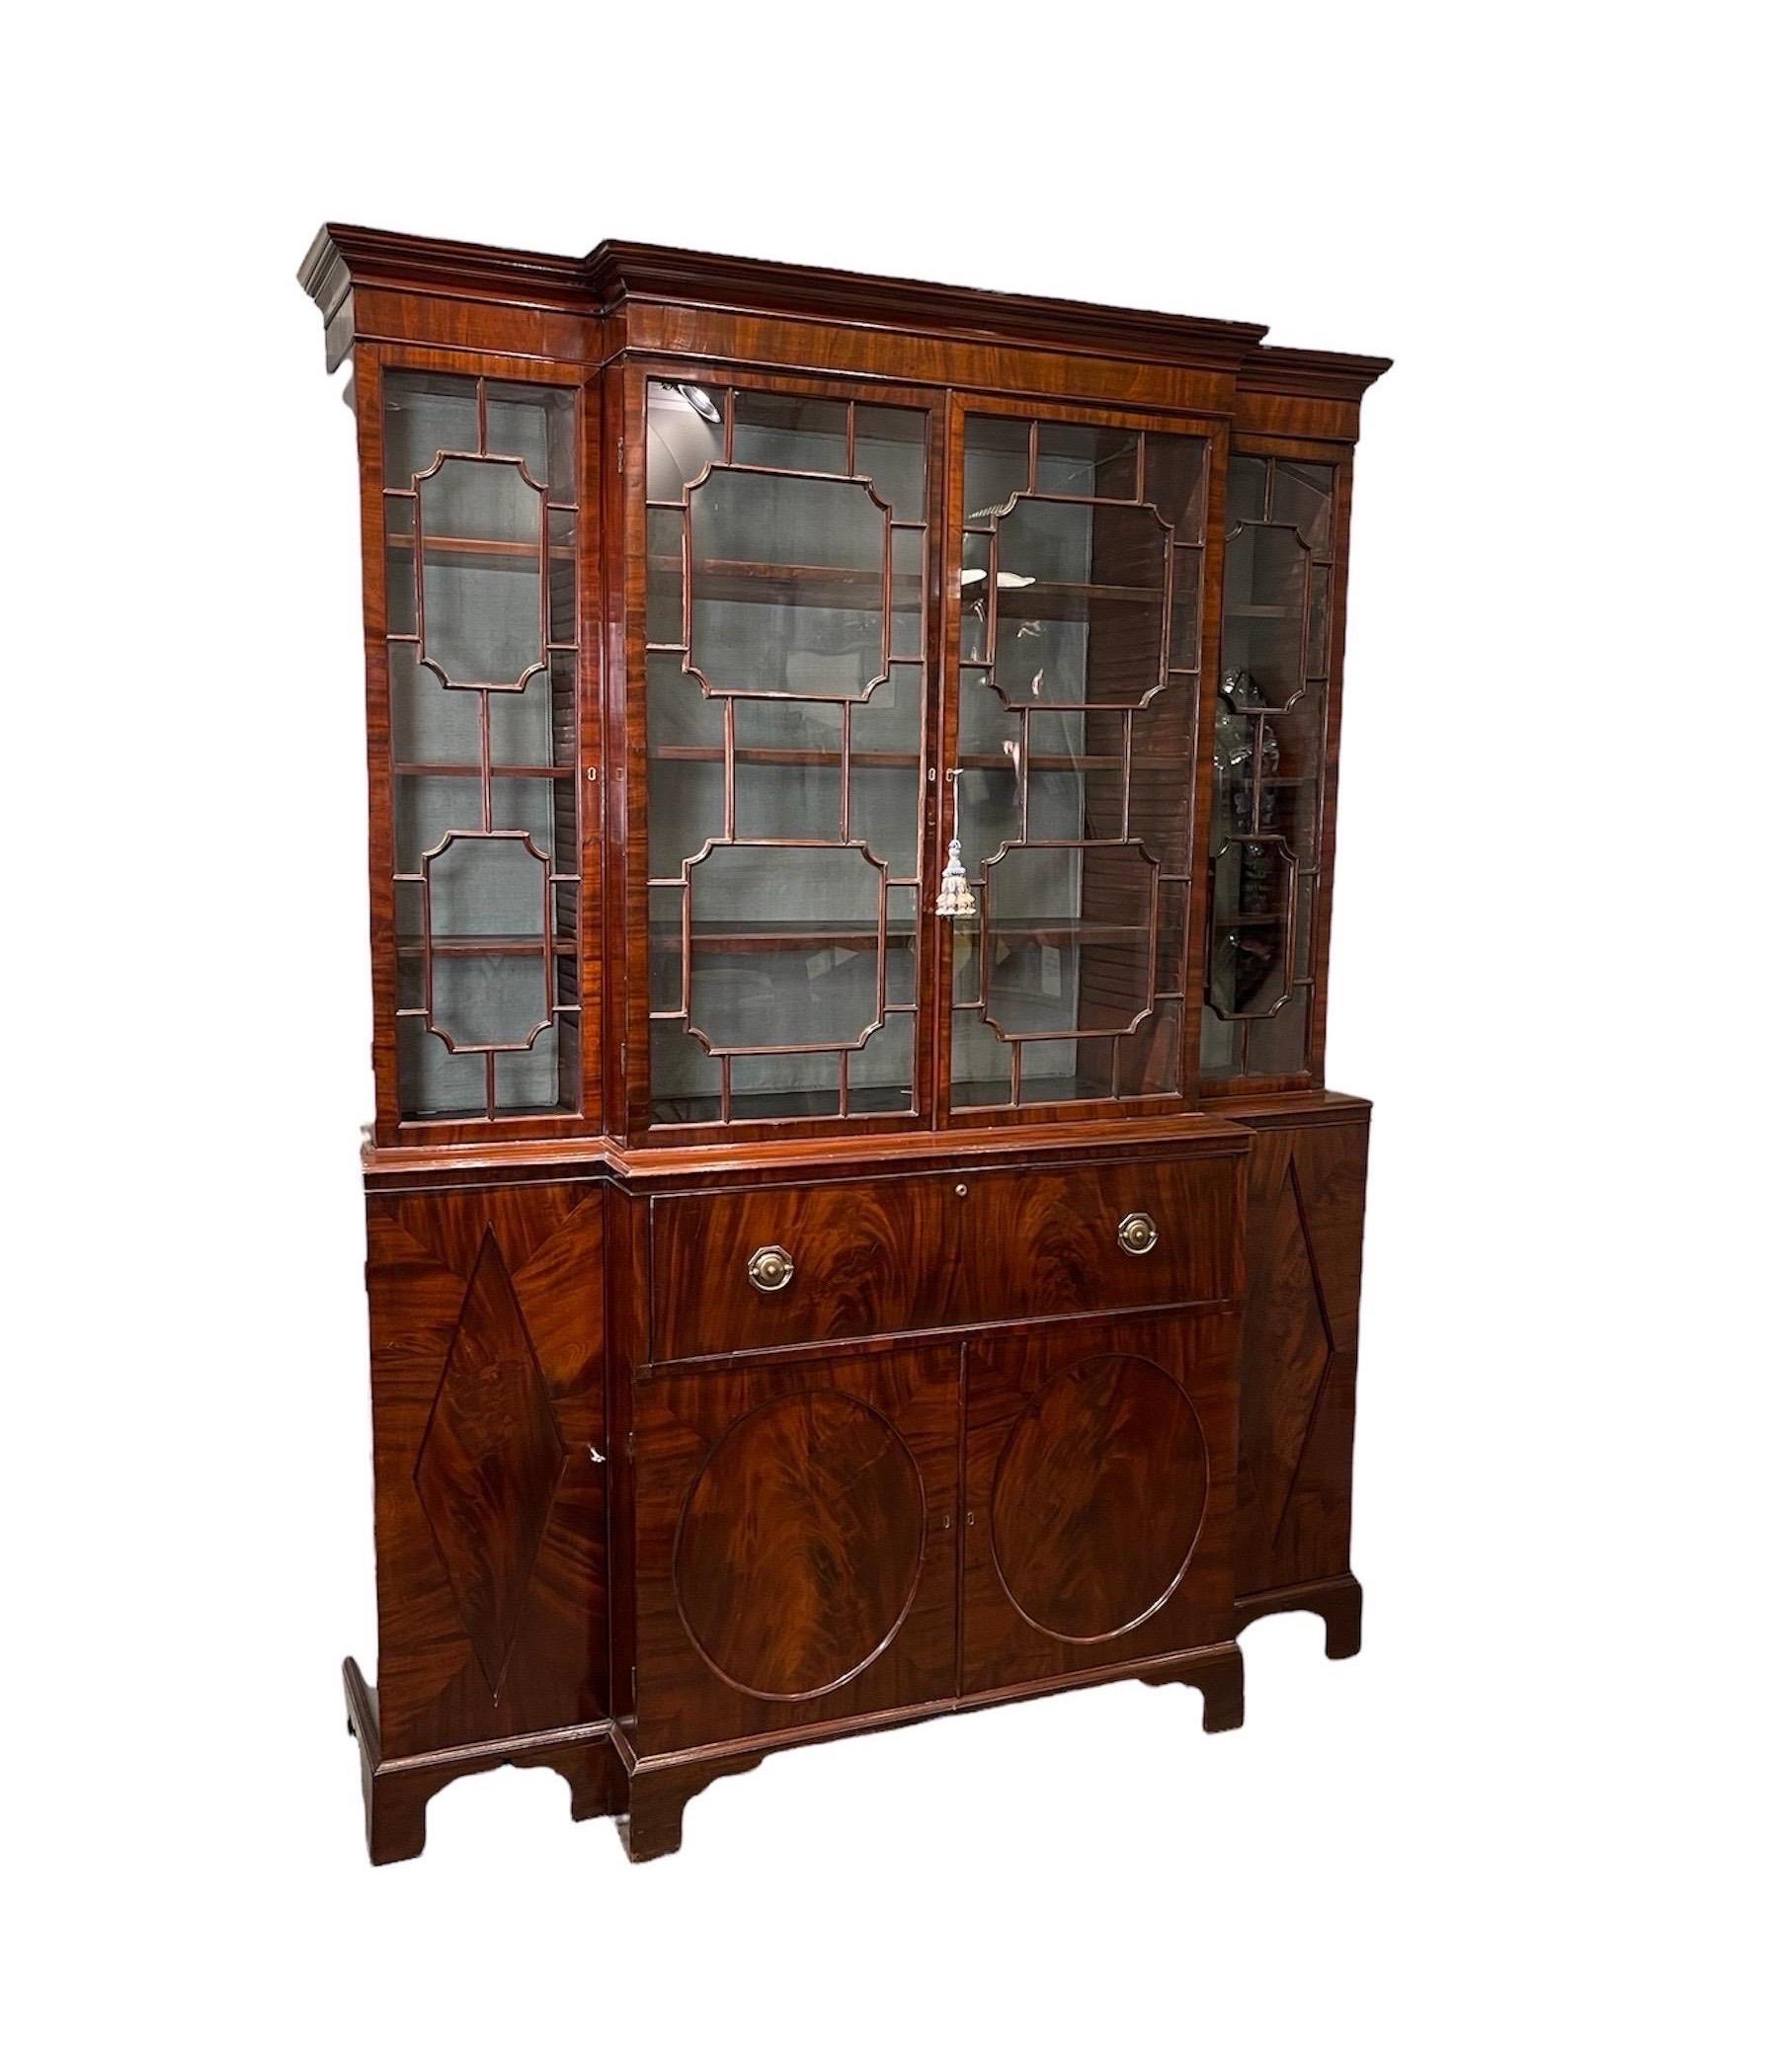 This exceptional George III Mahogany Breakfront Bureau Bookcase with Glazed Doors, has wonderful flame & crotch grain Mahogany. Comprised of a large central cabinet, flanked by 2 smaller cabinets all Lined in green silk. It’s doors have mullions in